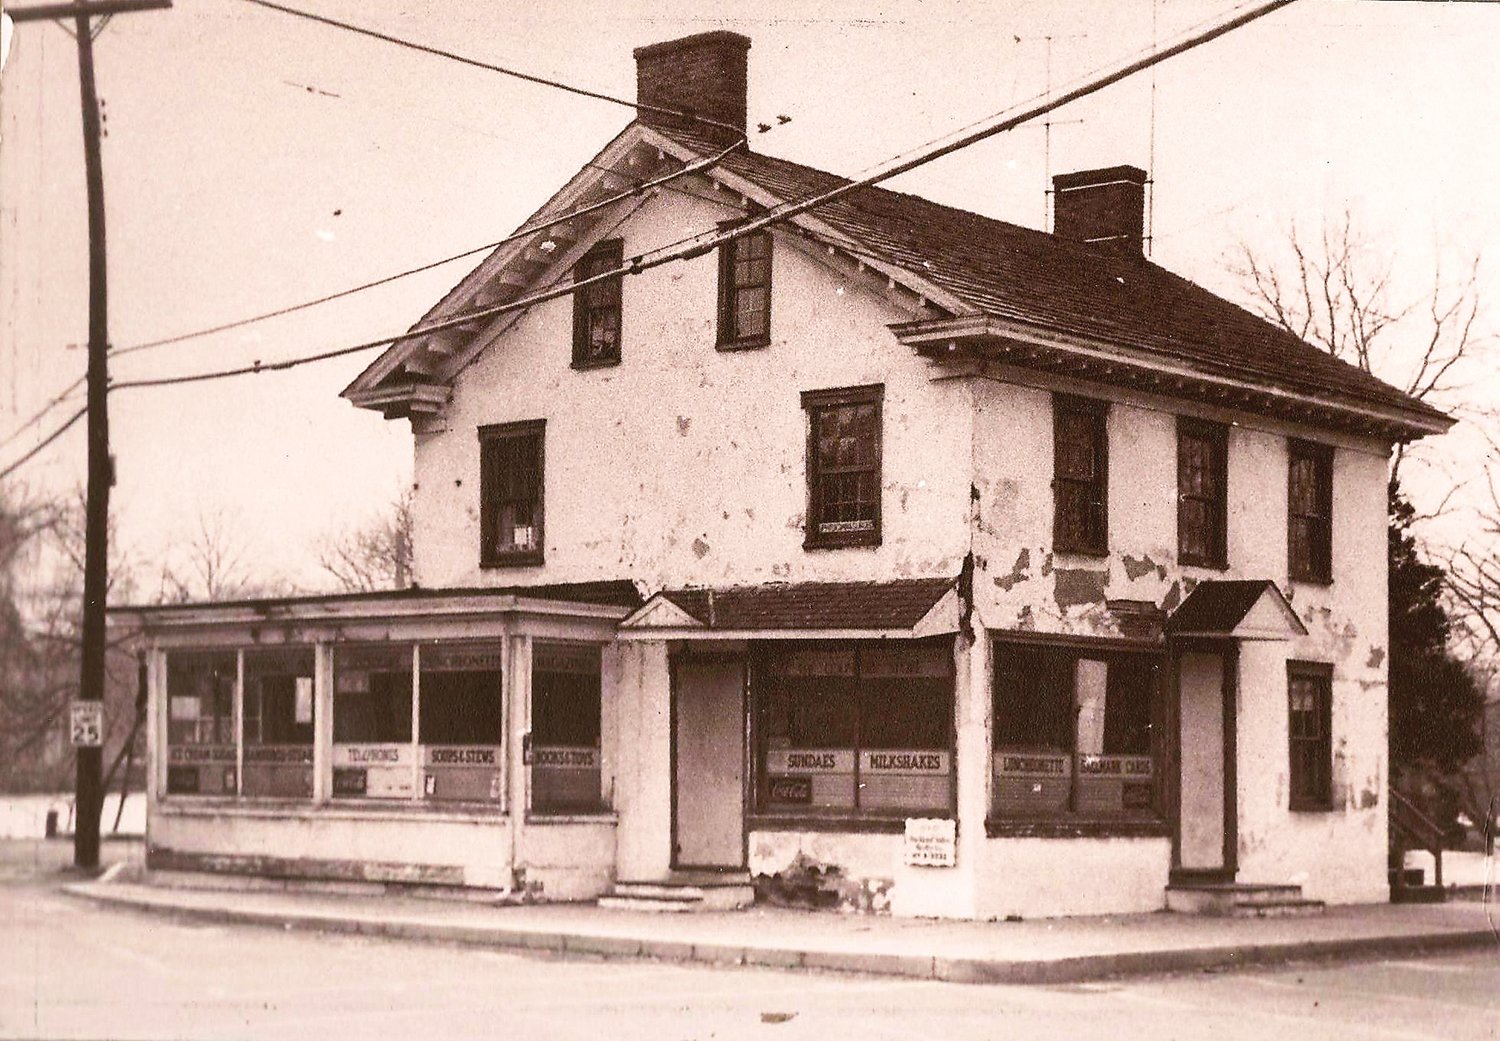 Find out what used to be sold at this corner business while on the Yardley walking tour May 19.